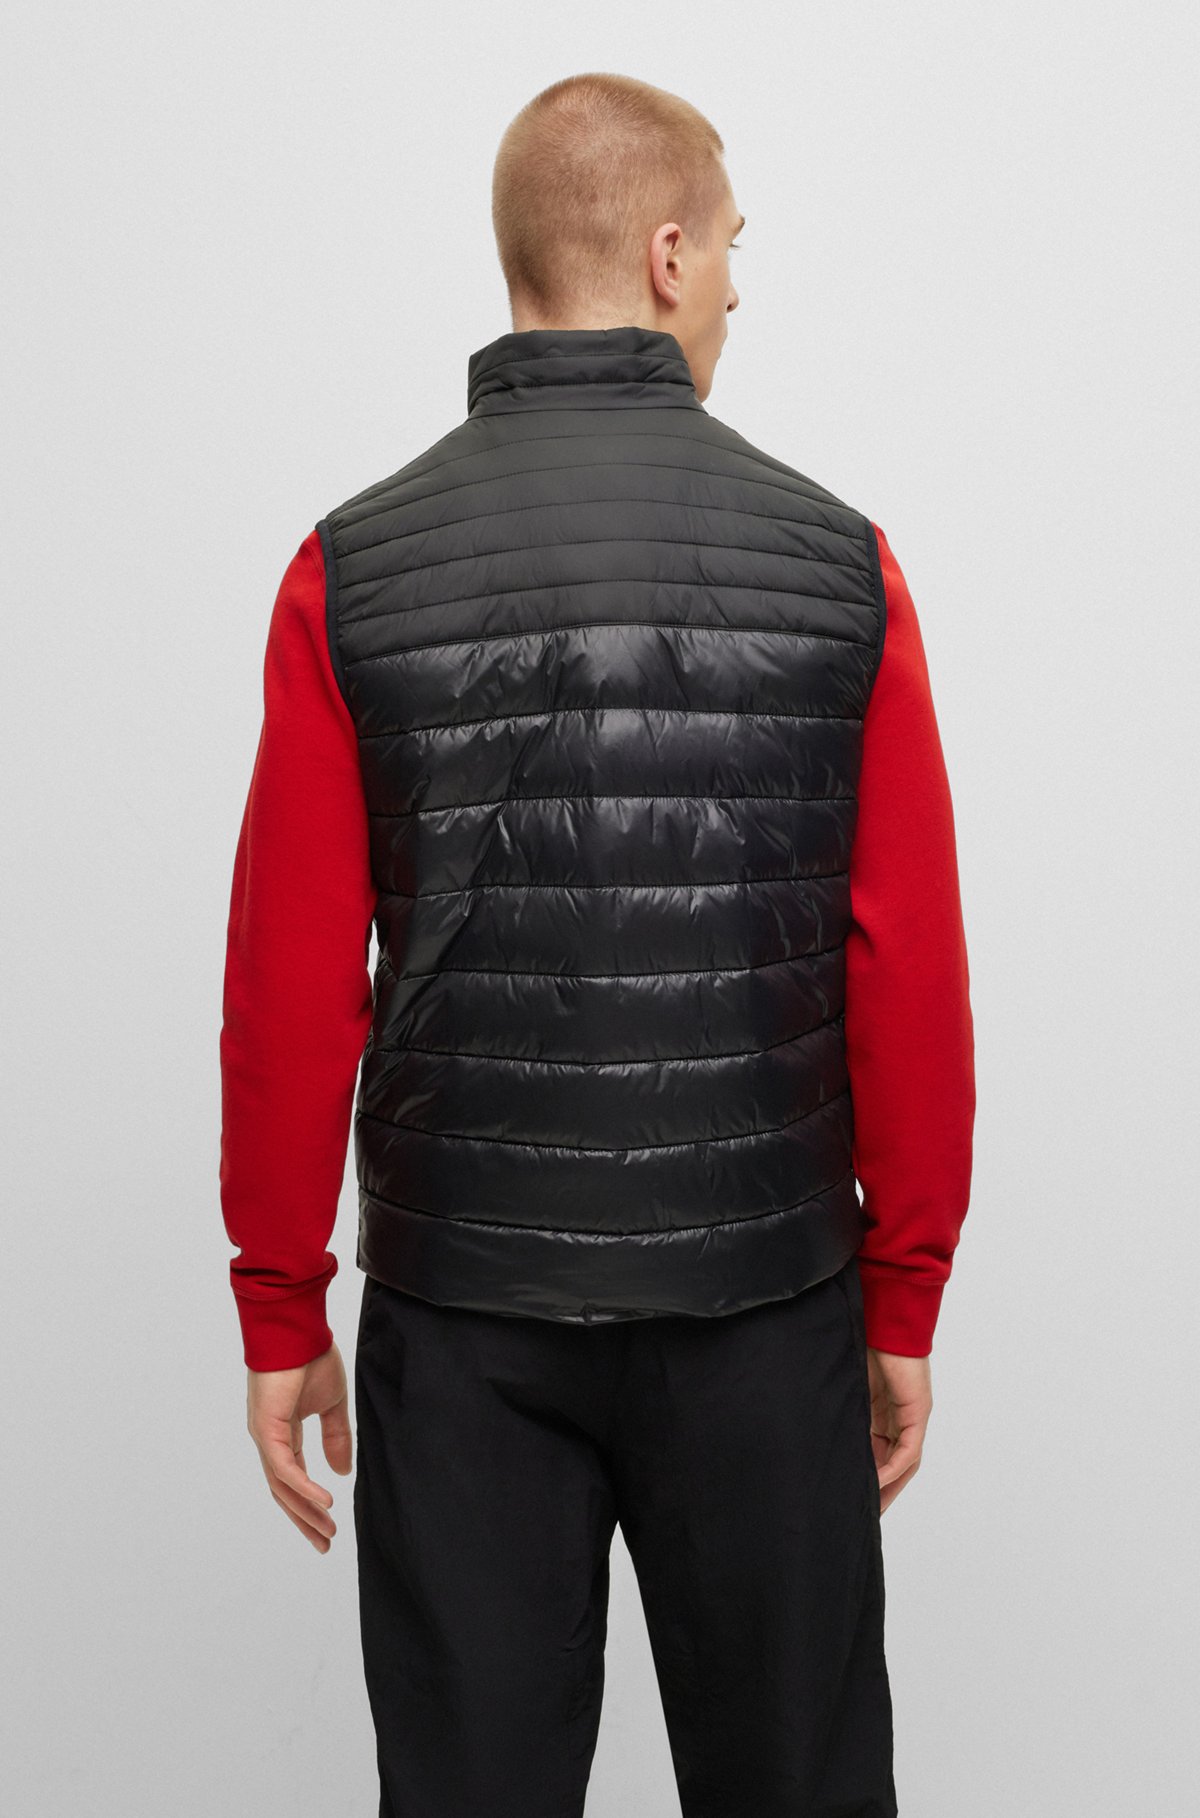 BOSS - Water-repellent gilet in gloss and matte fabrics